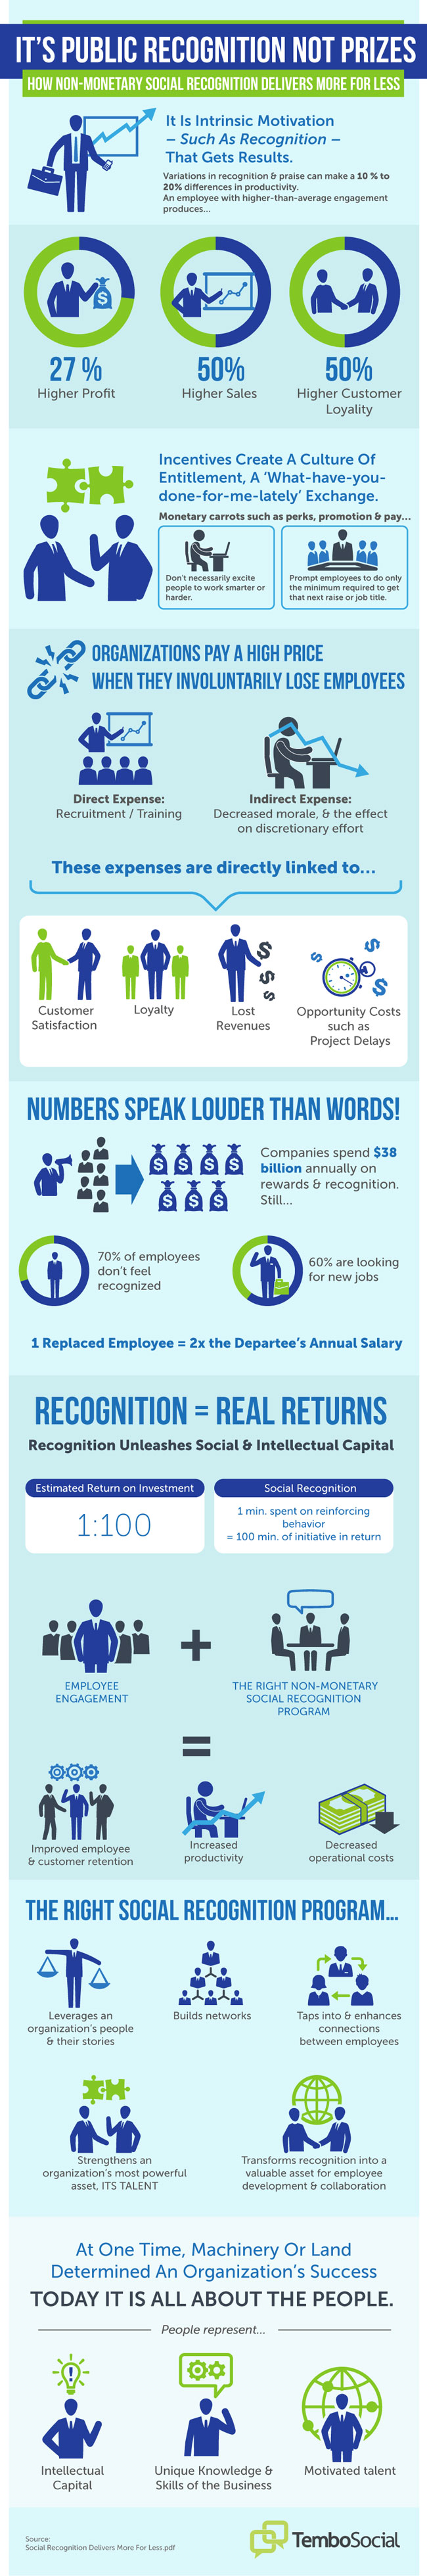 recognition-infographic